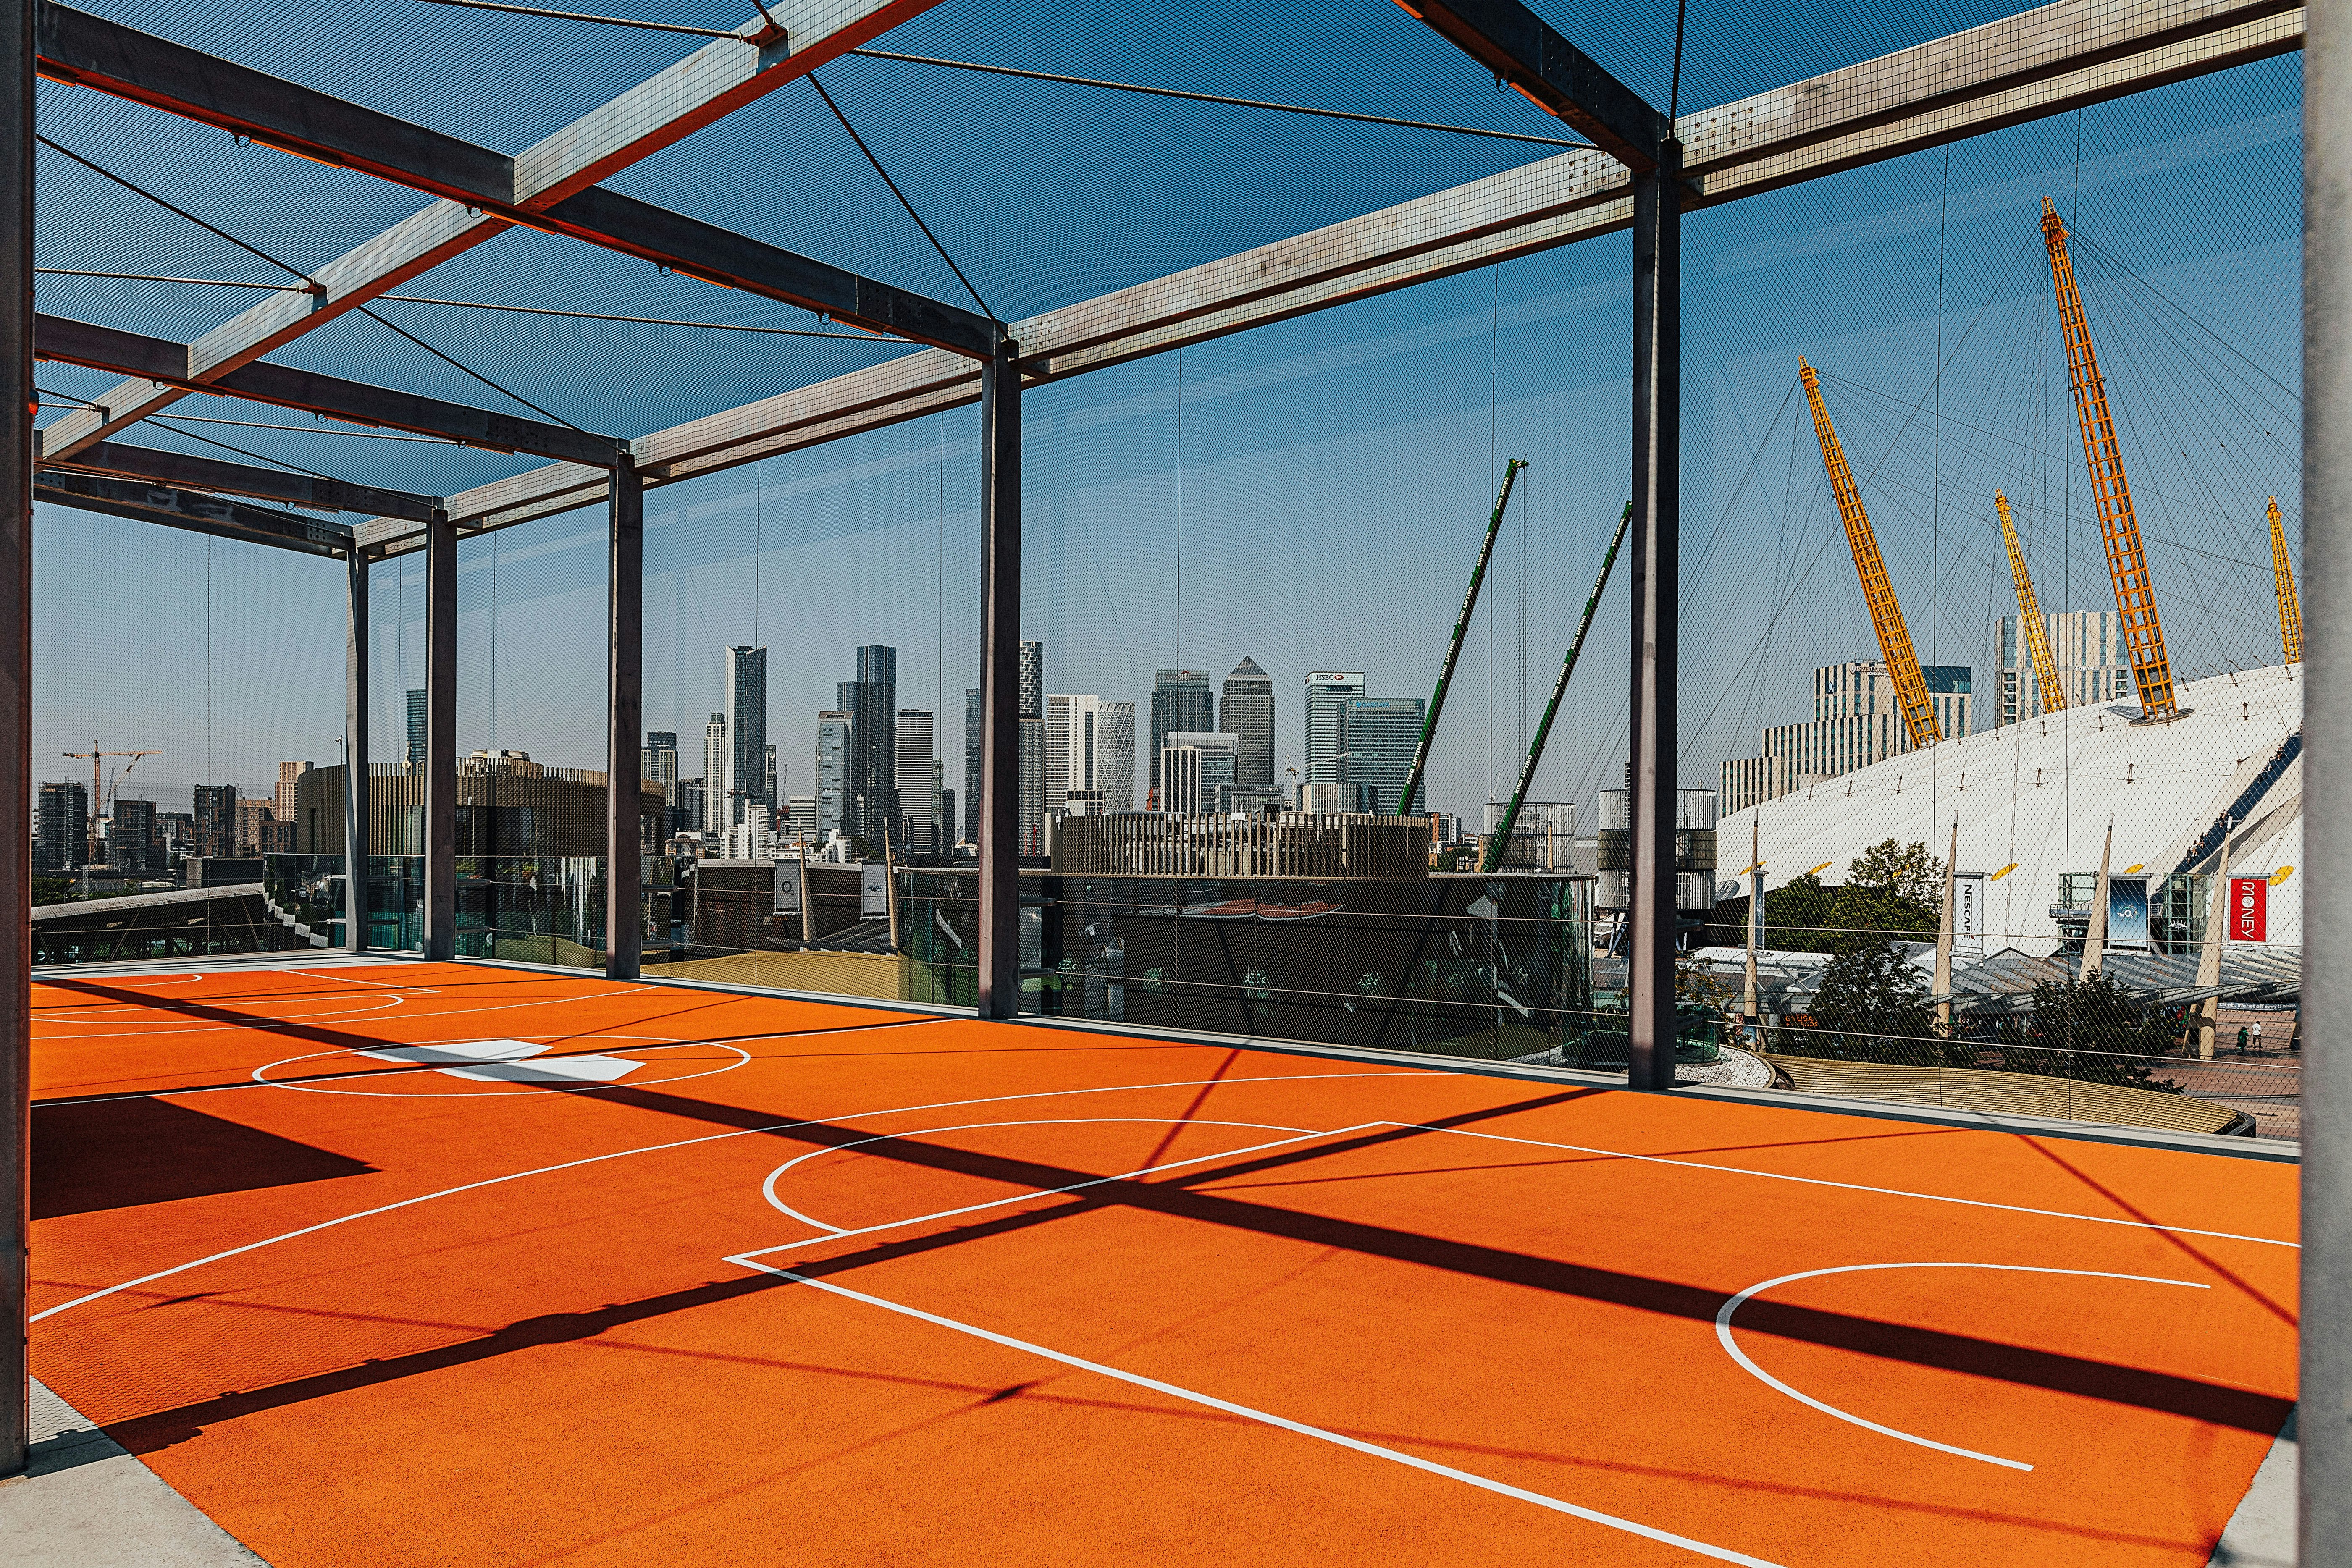 Rooftop Basketball Court - The Court image 1